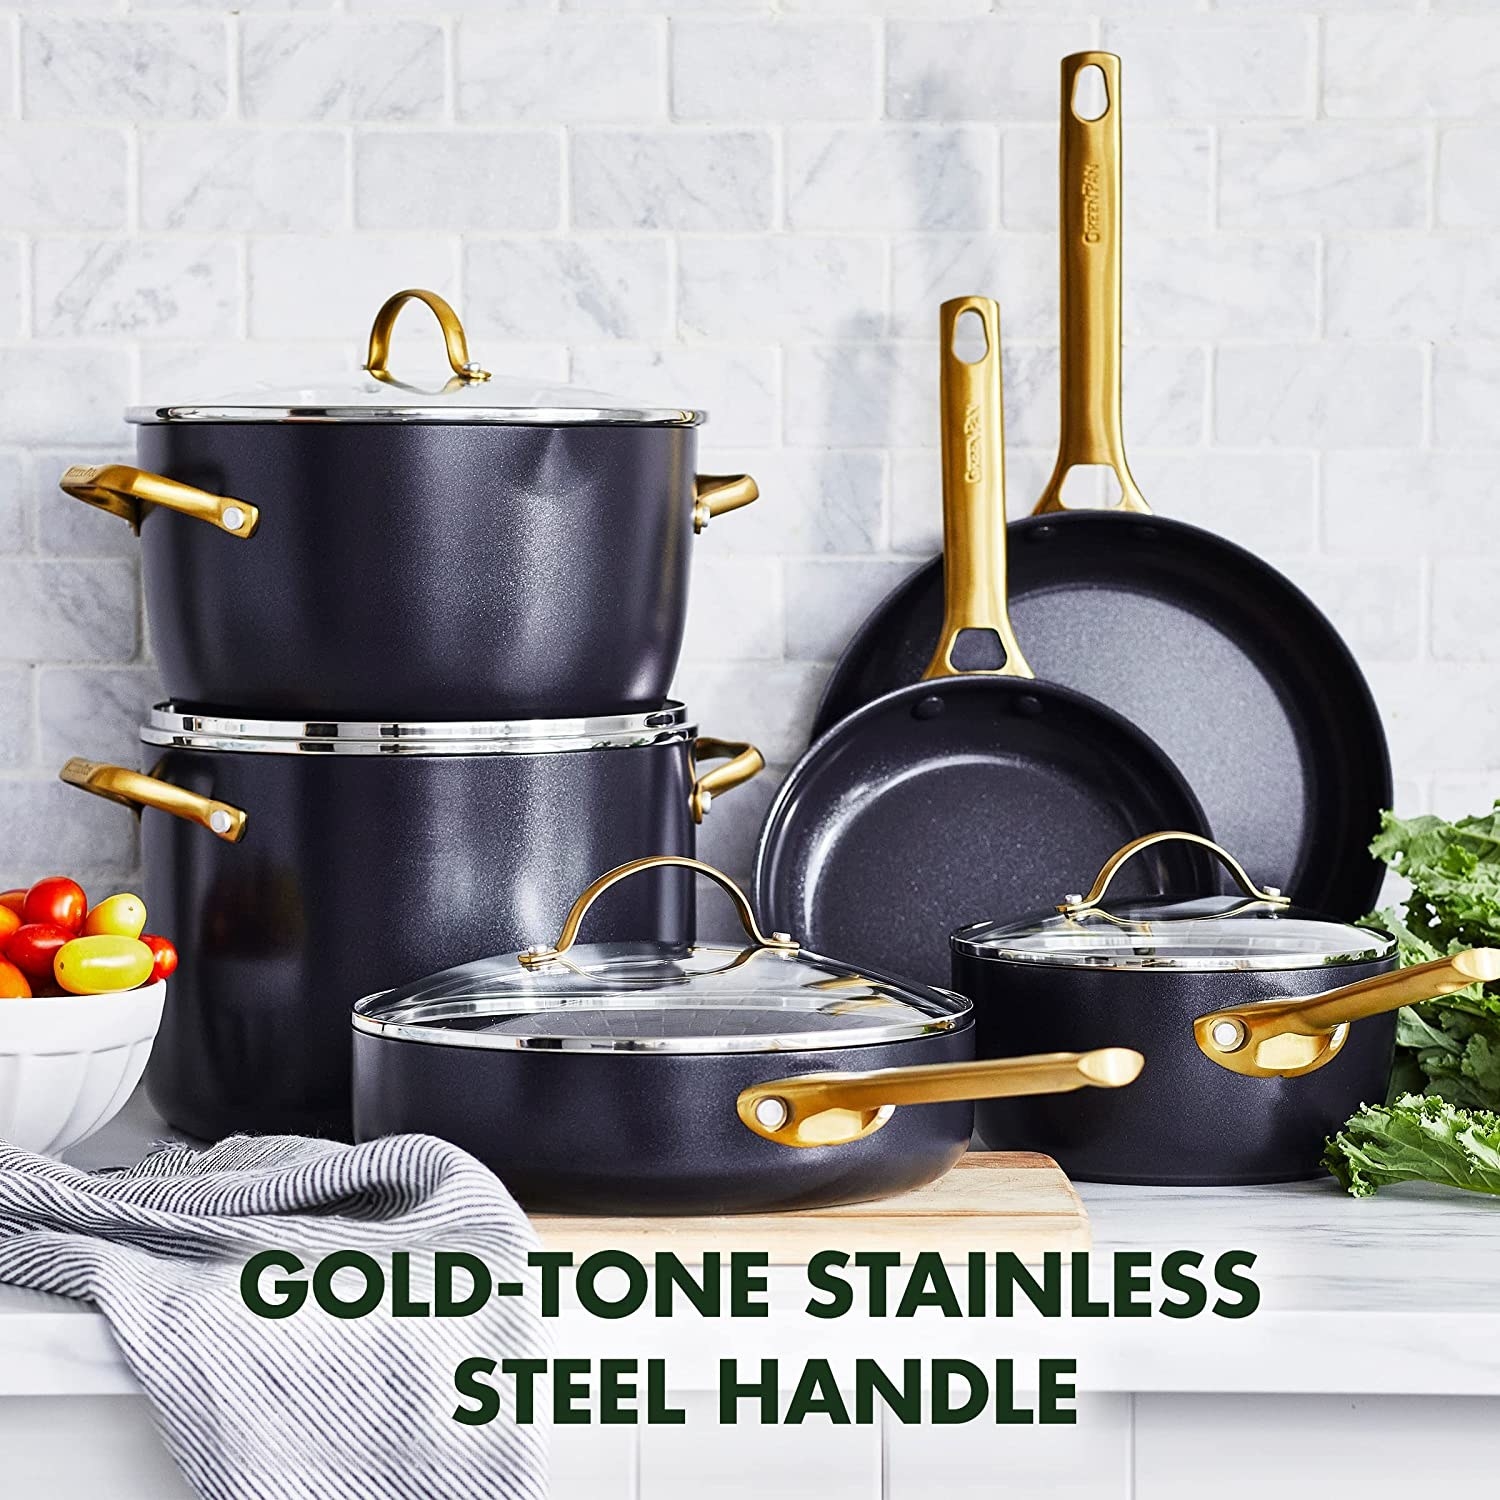 The set with gold-tone stainless steel handles